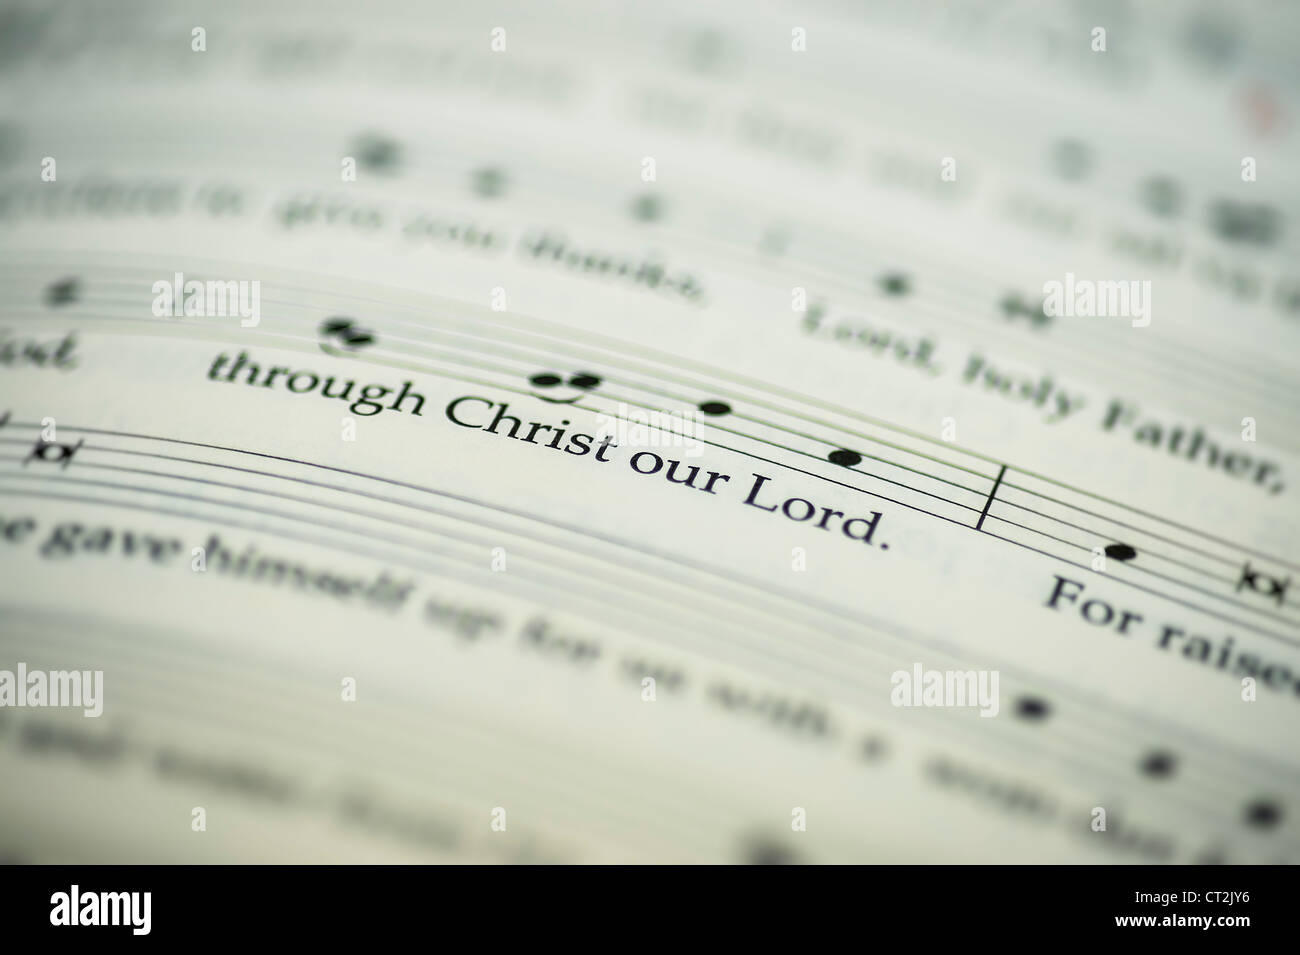 Sacred liturgical text and music. Stock Photo